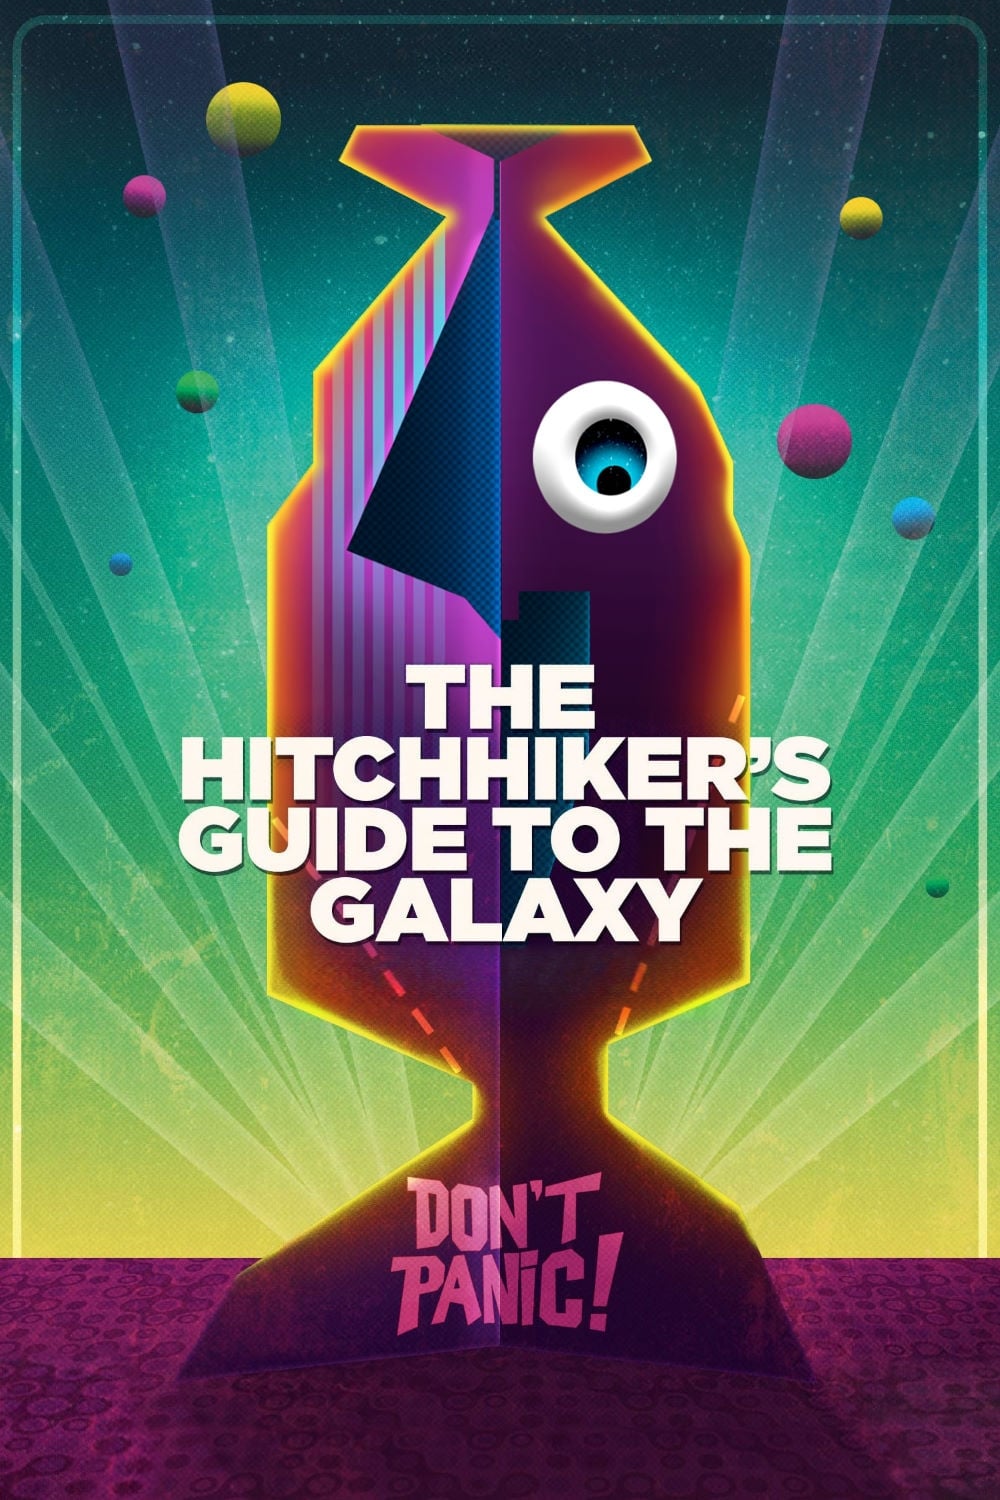 The Hitchhiker's Guide to the Galaxy TV Shows About End Of The World